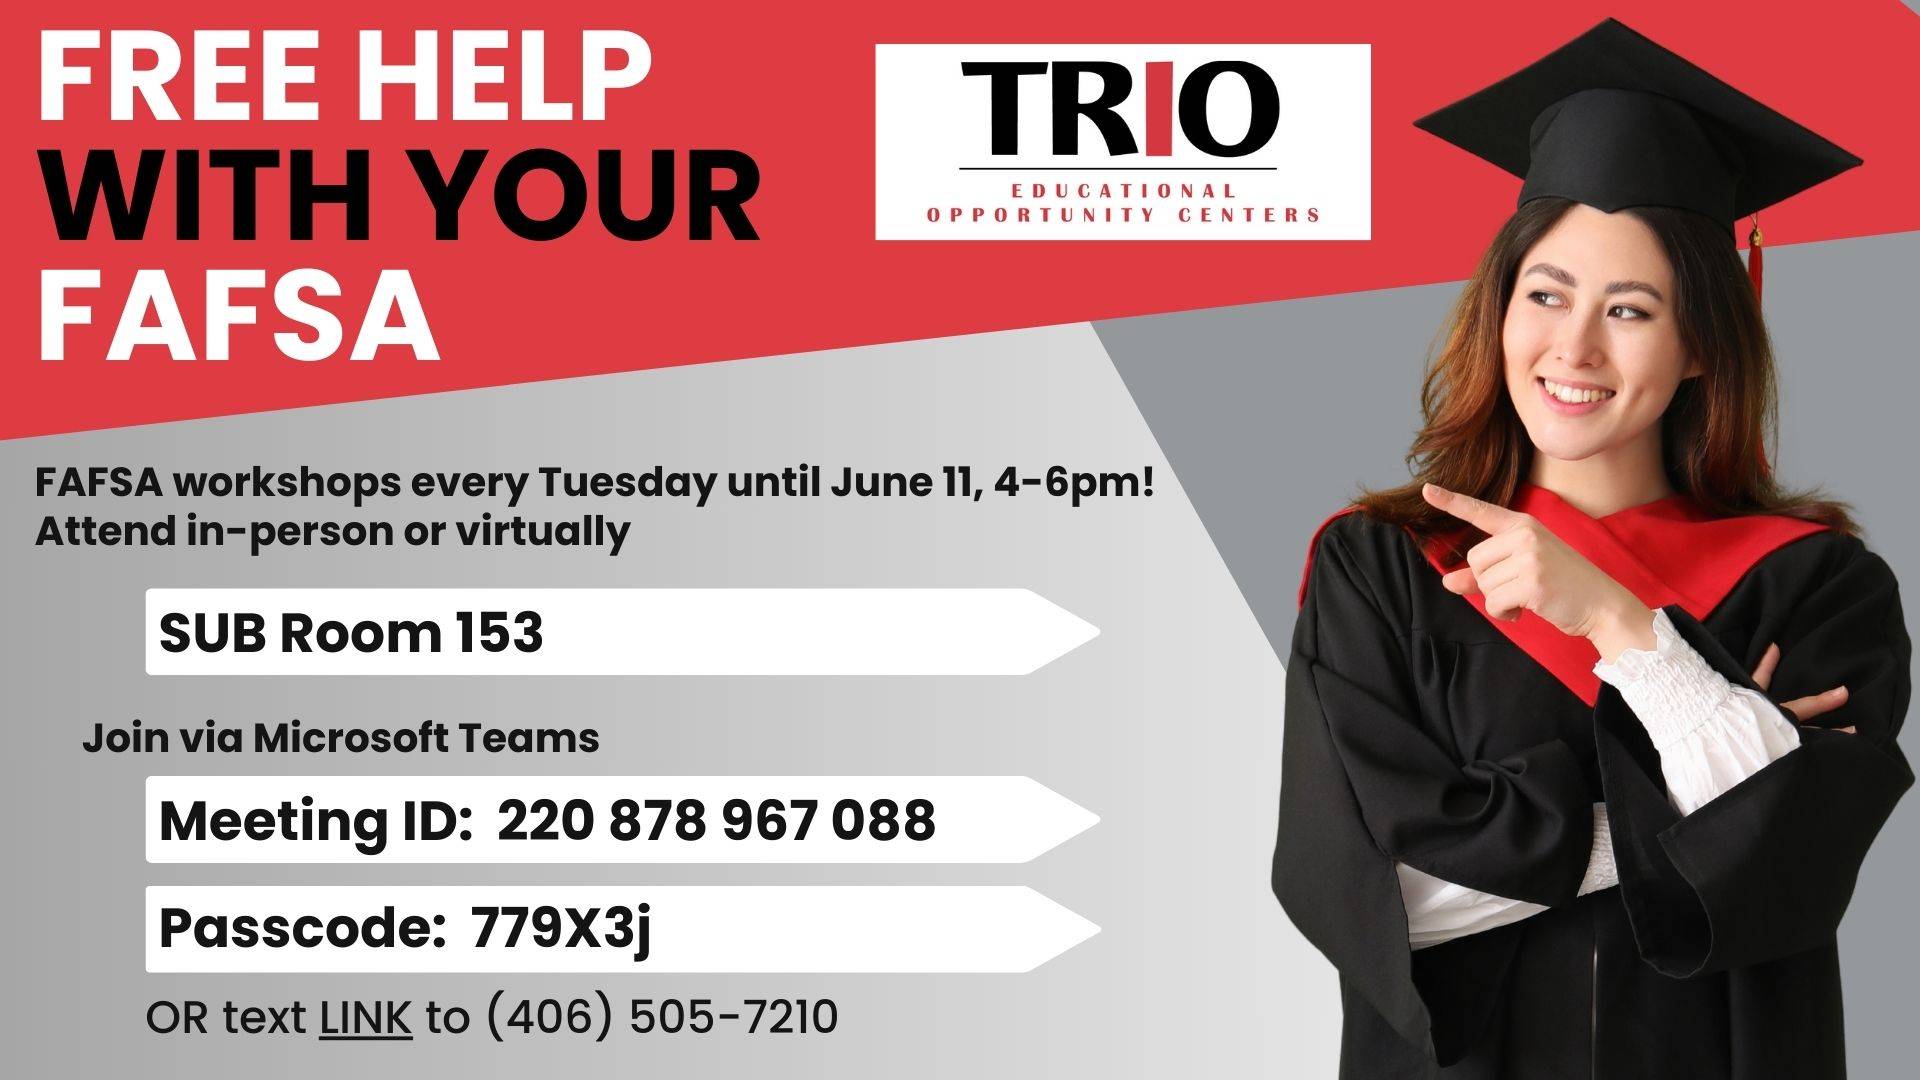 FREE help with your FAFSA. FAFSA workshops every Tuesday until June 11, 4-6pm! Attend in-person or virtually. SUB Room 153. Join via Microsoft Teams:  Meeting ID:  220 878 967 088 Passcode:  779X3j. OR text LINK to (406) 505-7210